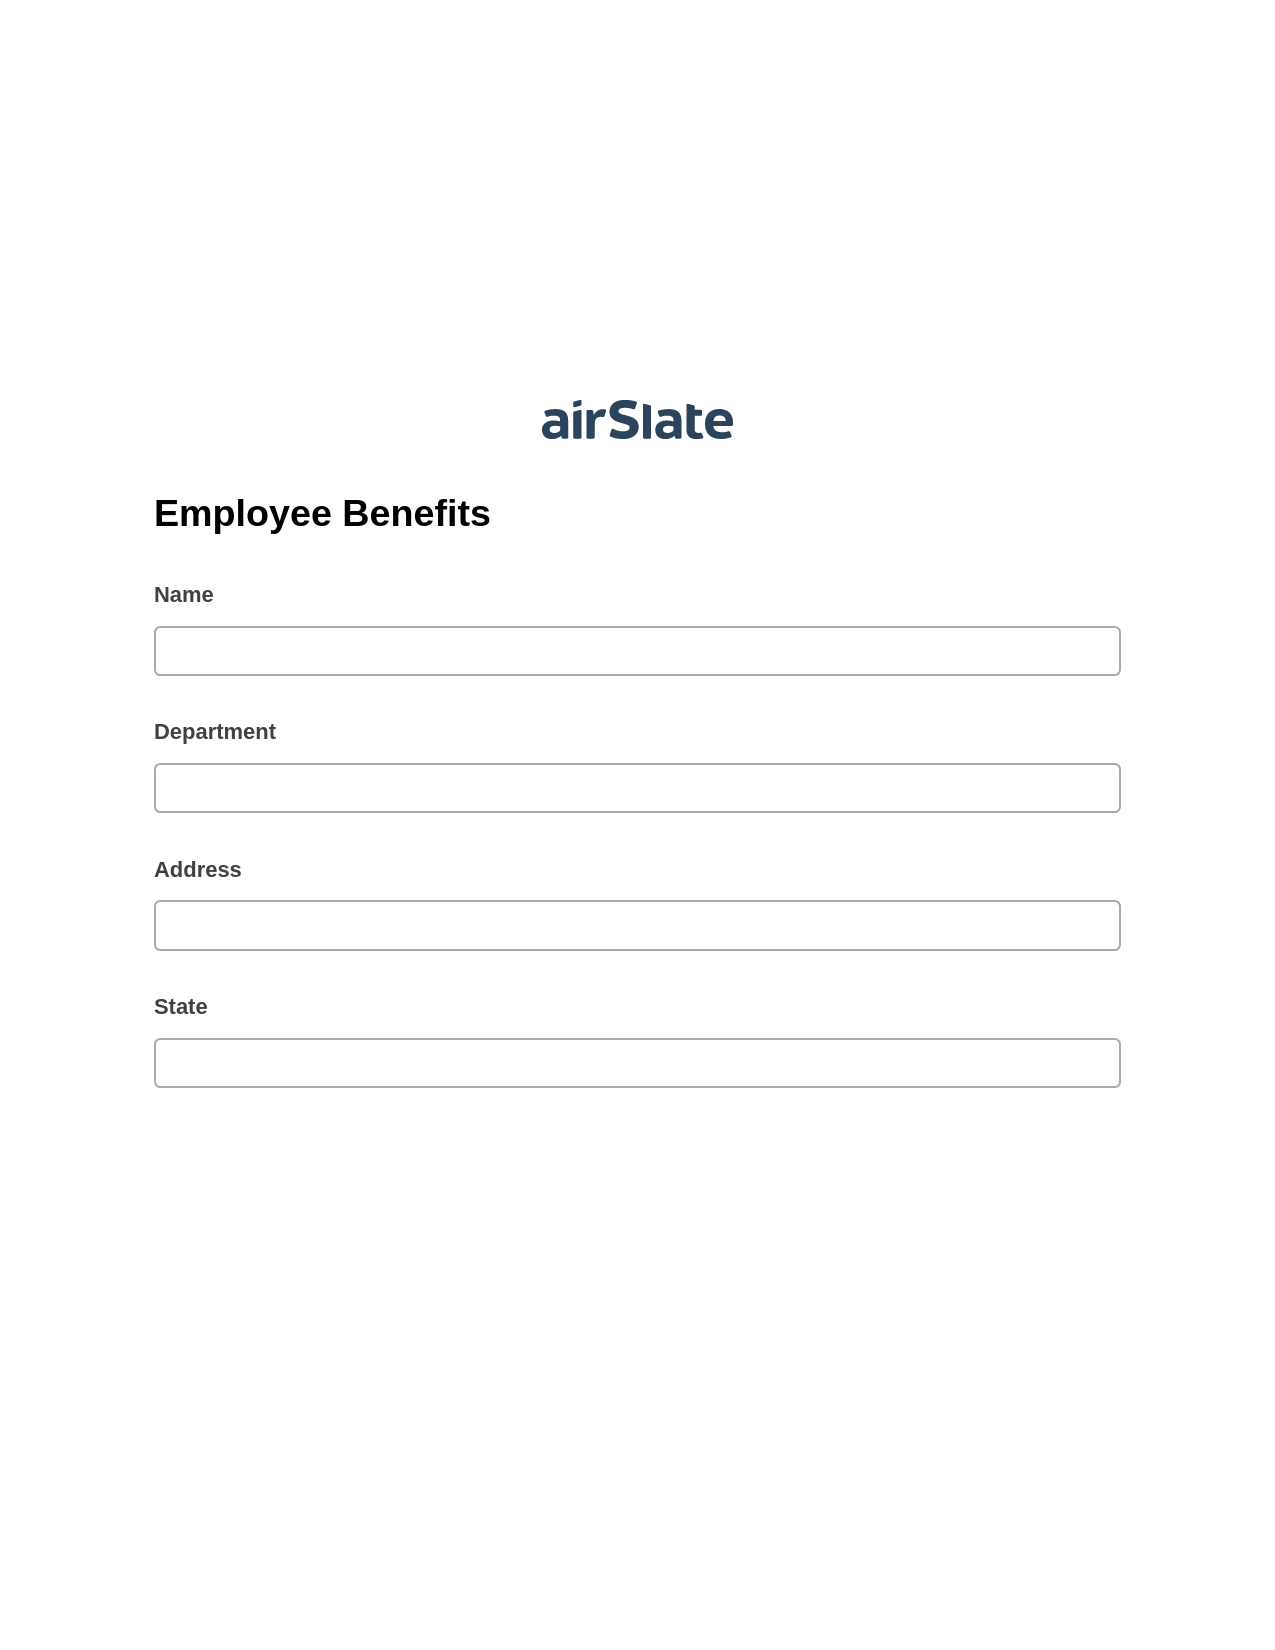 Employee Benefits Pre-fill Dropdown from Airtable, Audit Trail Bot, Export to Excel 365 Bot